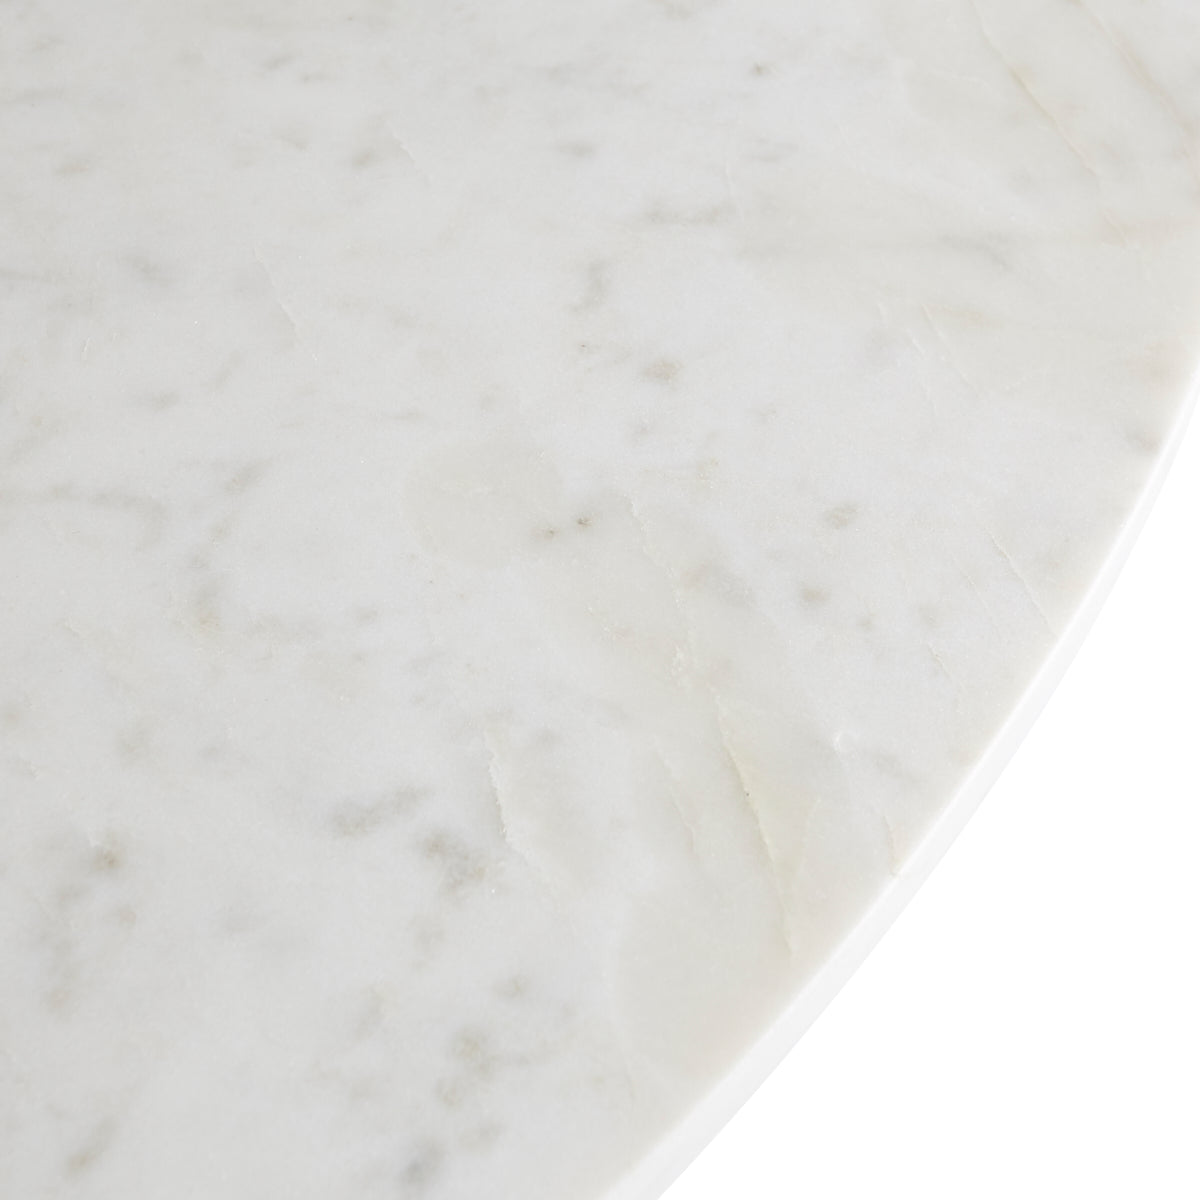 Close-up view of Faceted Marble Table tabletop